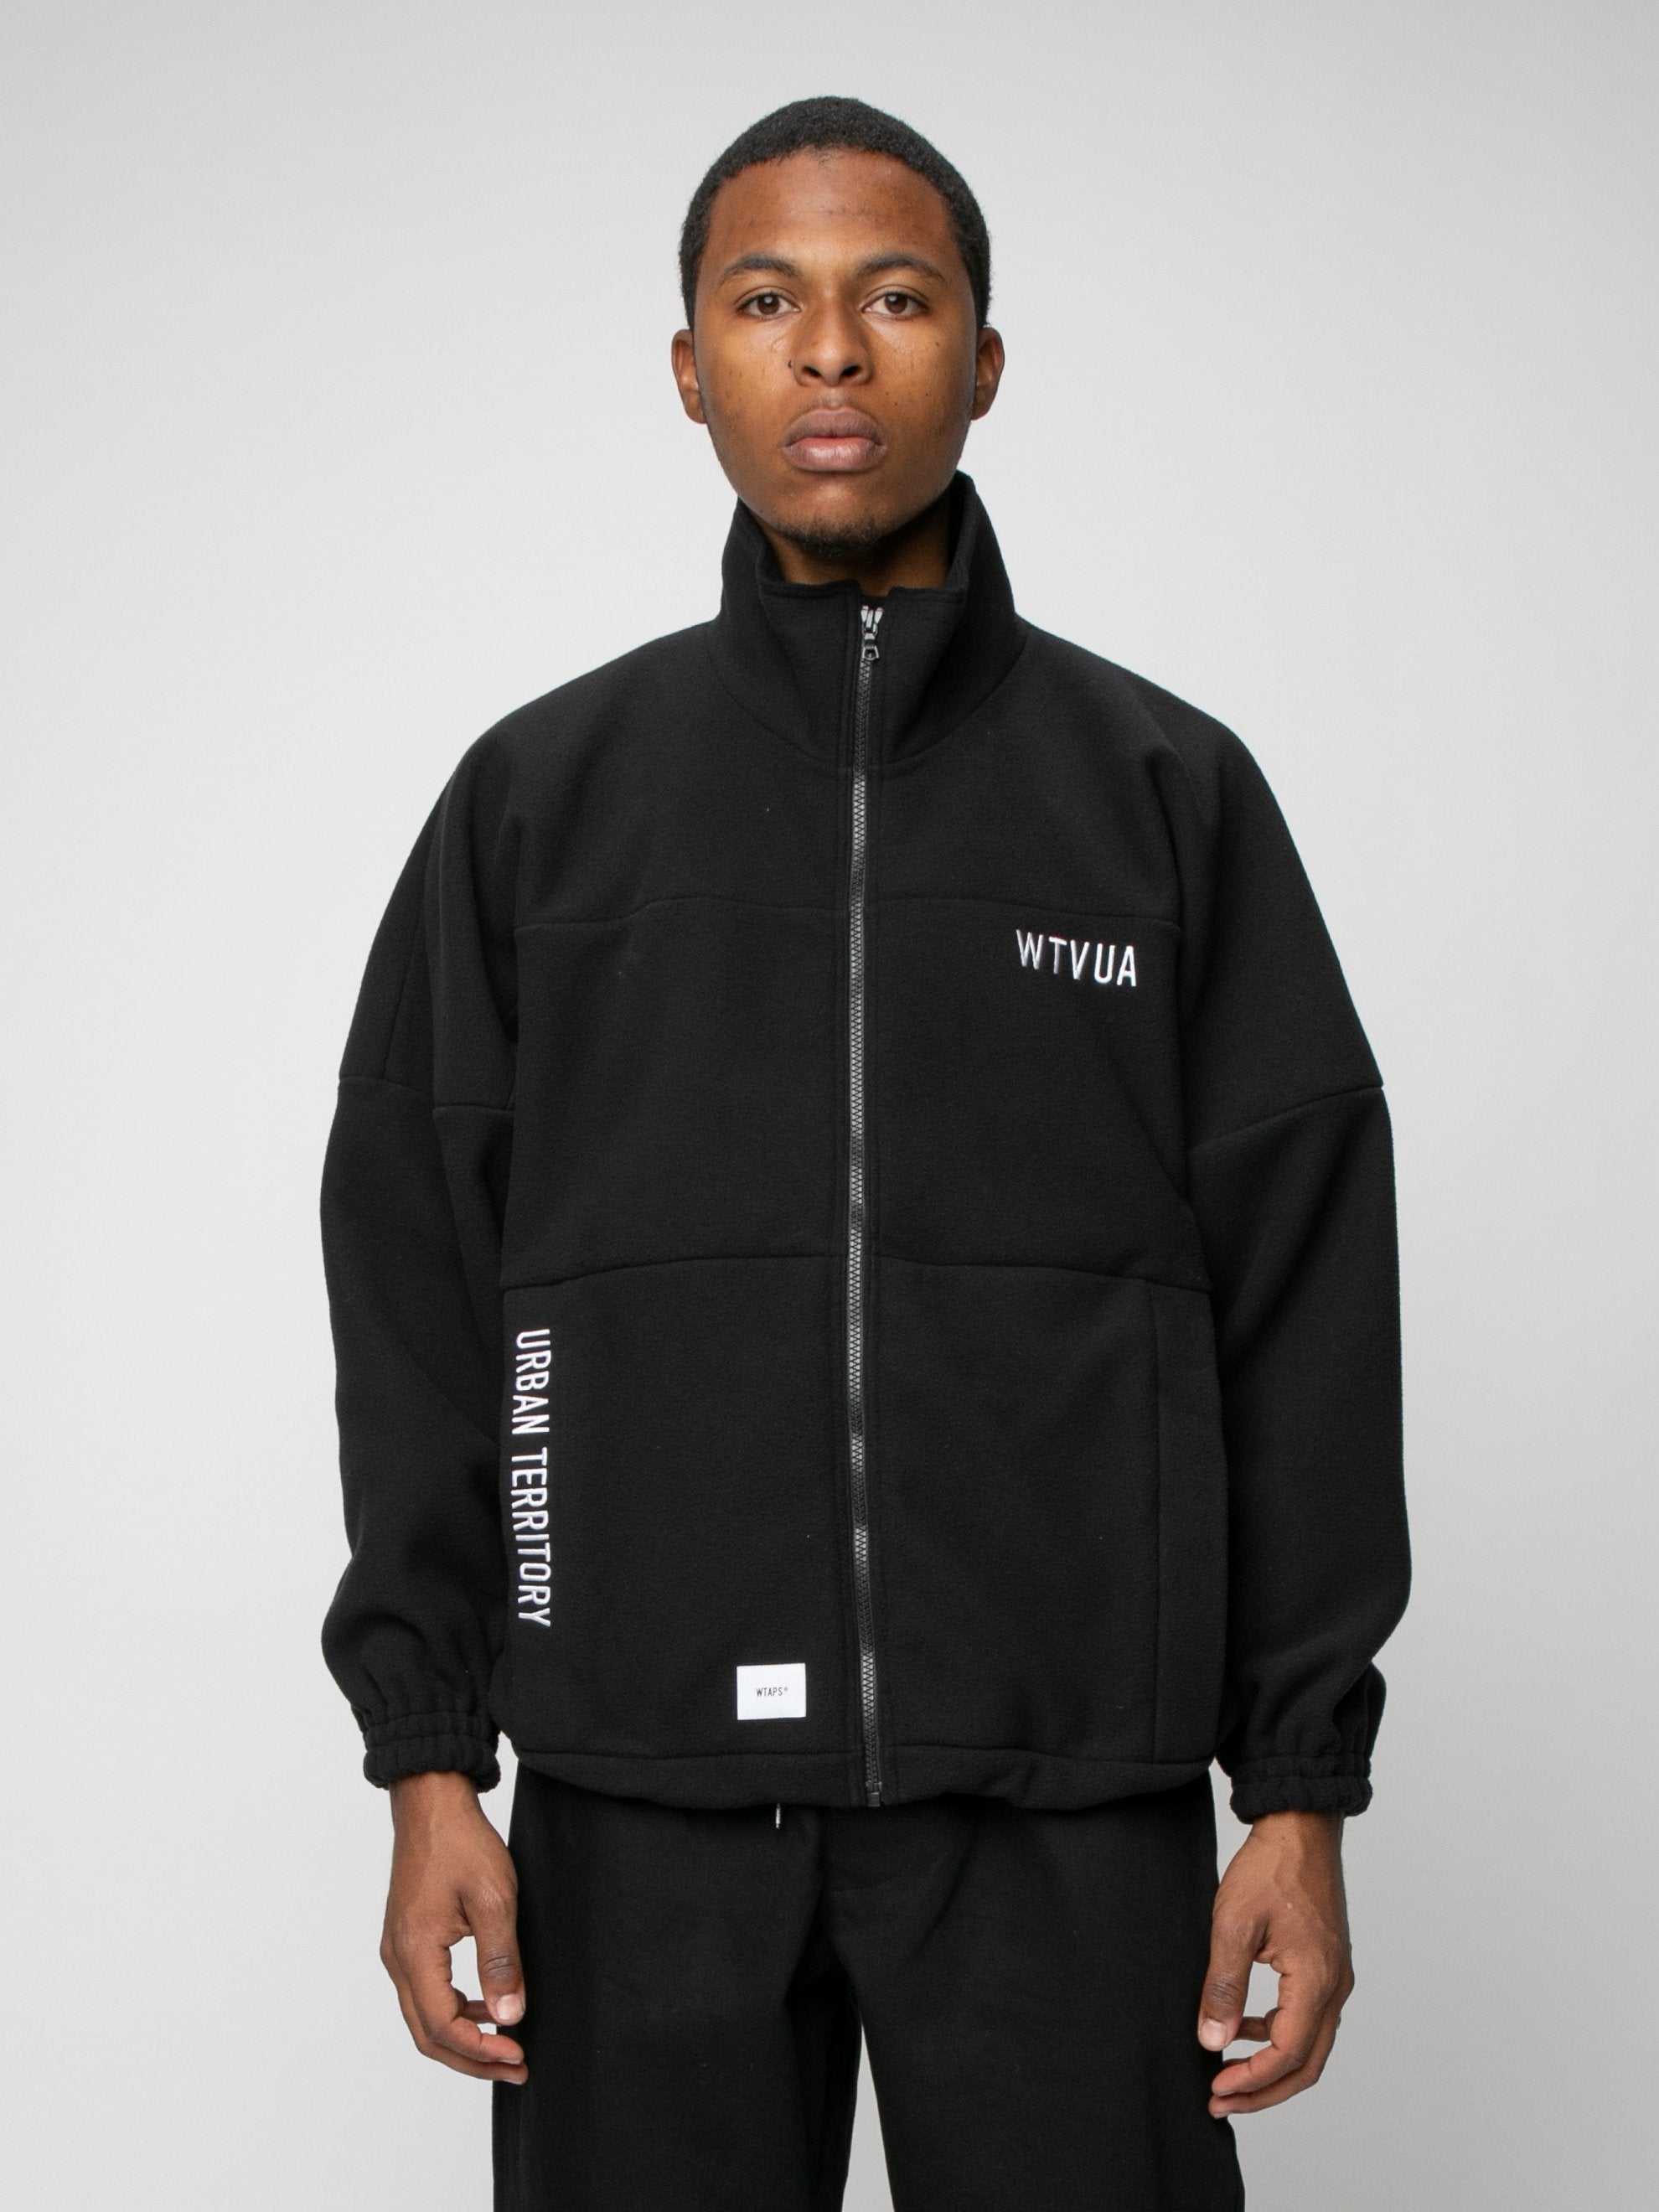 19aw WTAPS FORESTER JACKET BLACK M